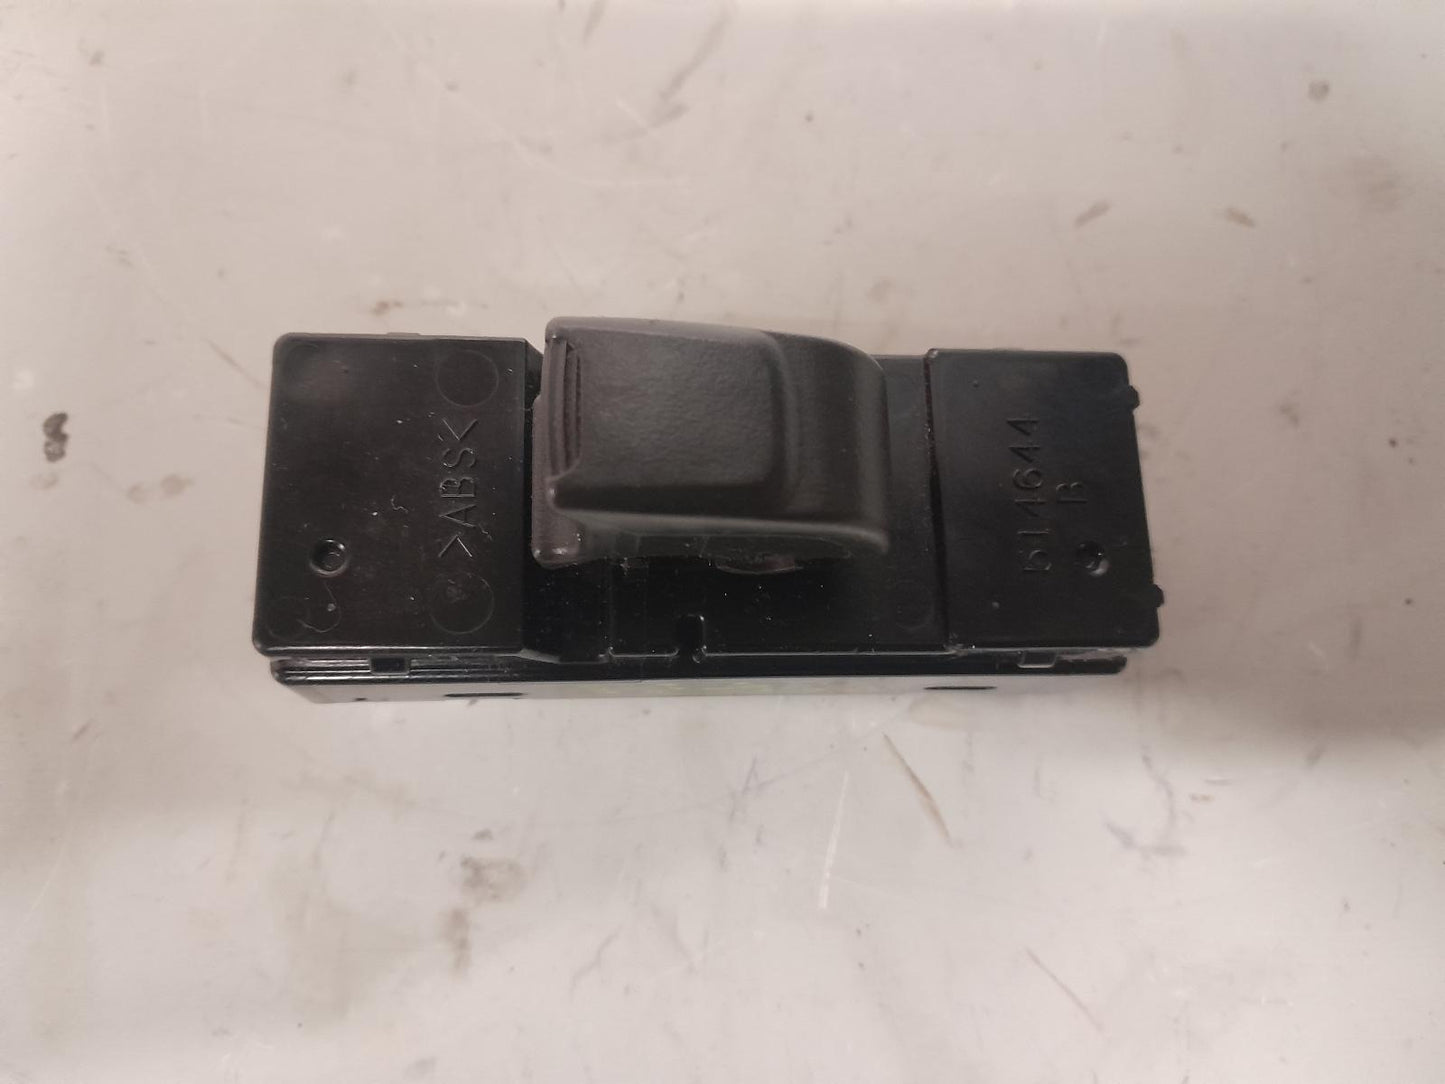 Holden Rodeo Power Window Switch